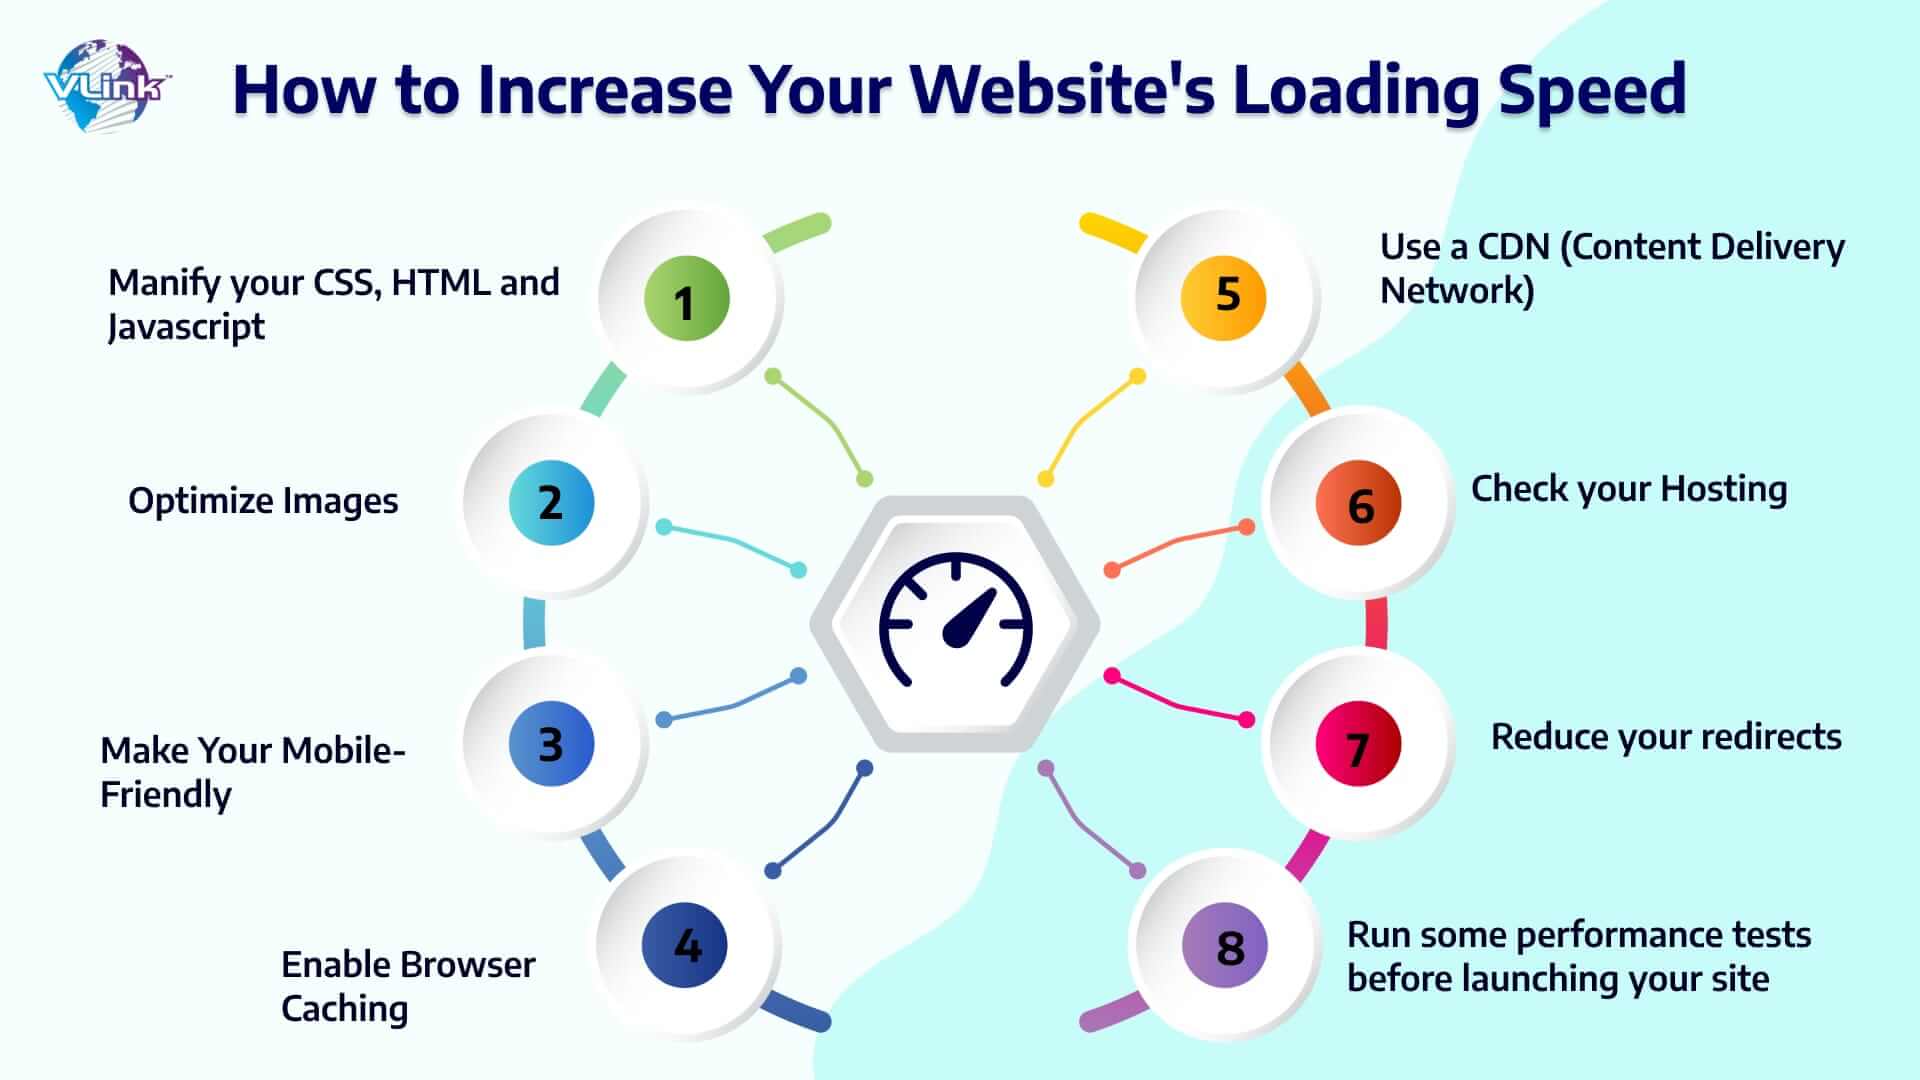 Tips to Increase your Website's Loading Speed 